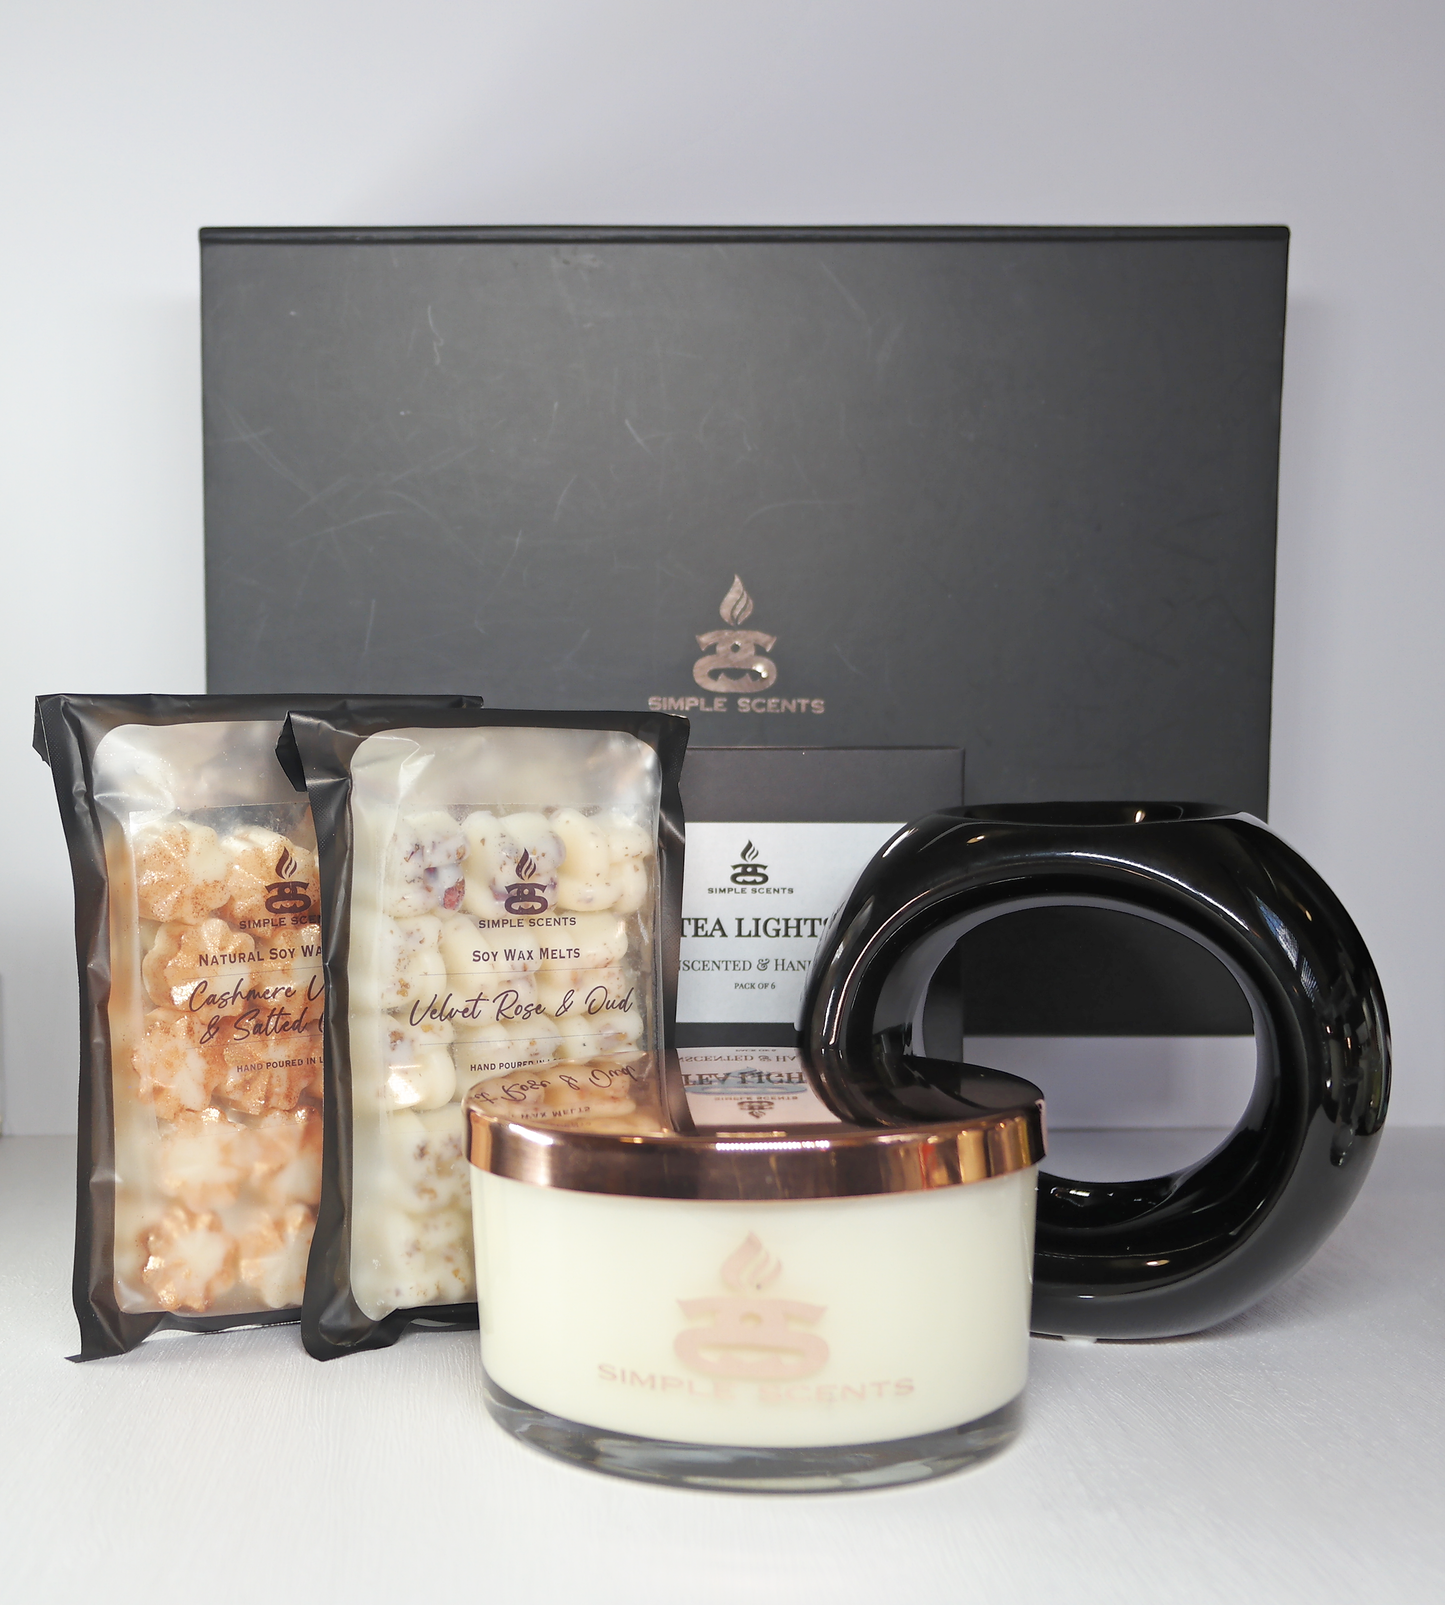 Simple Scents Experience Candle, Wax Melt & Oslo Burner Gift Set